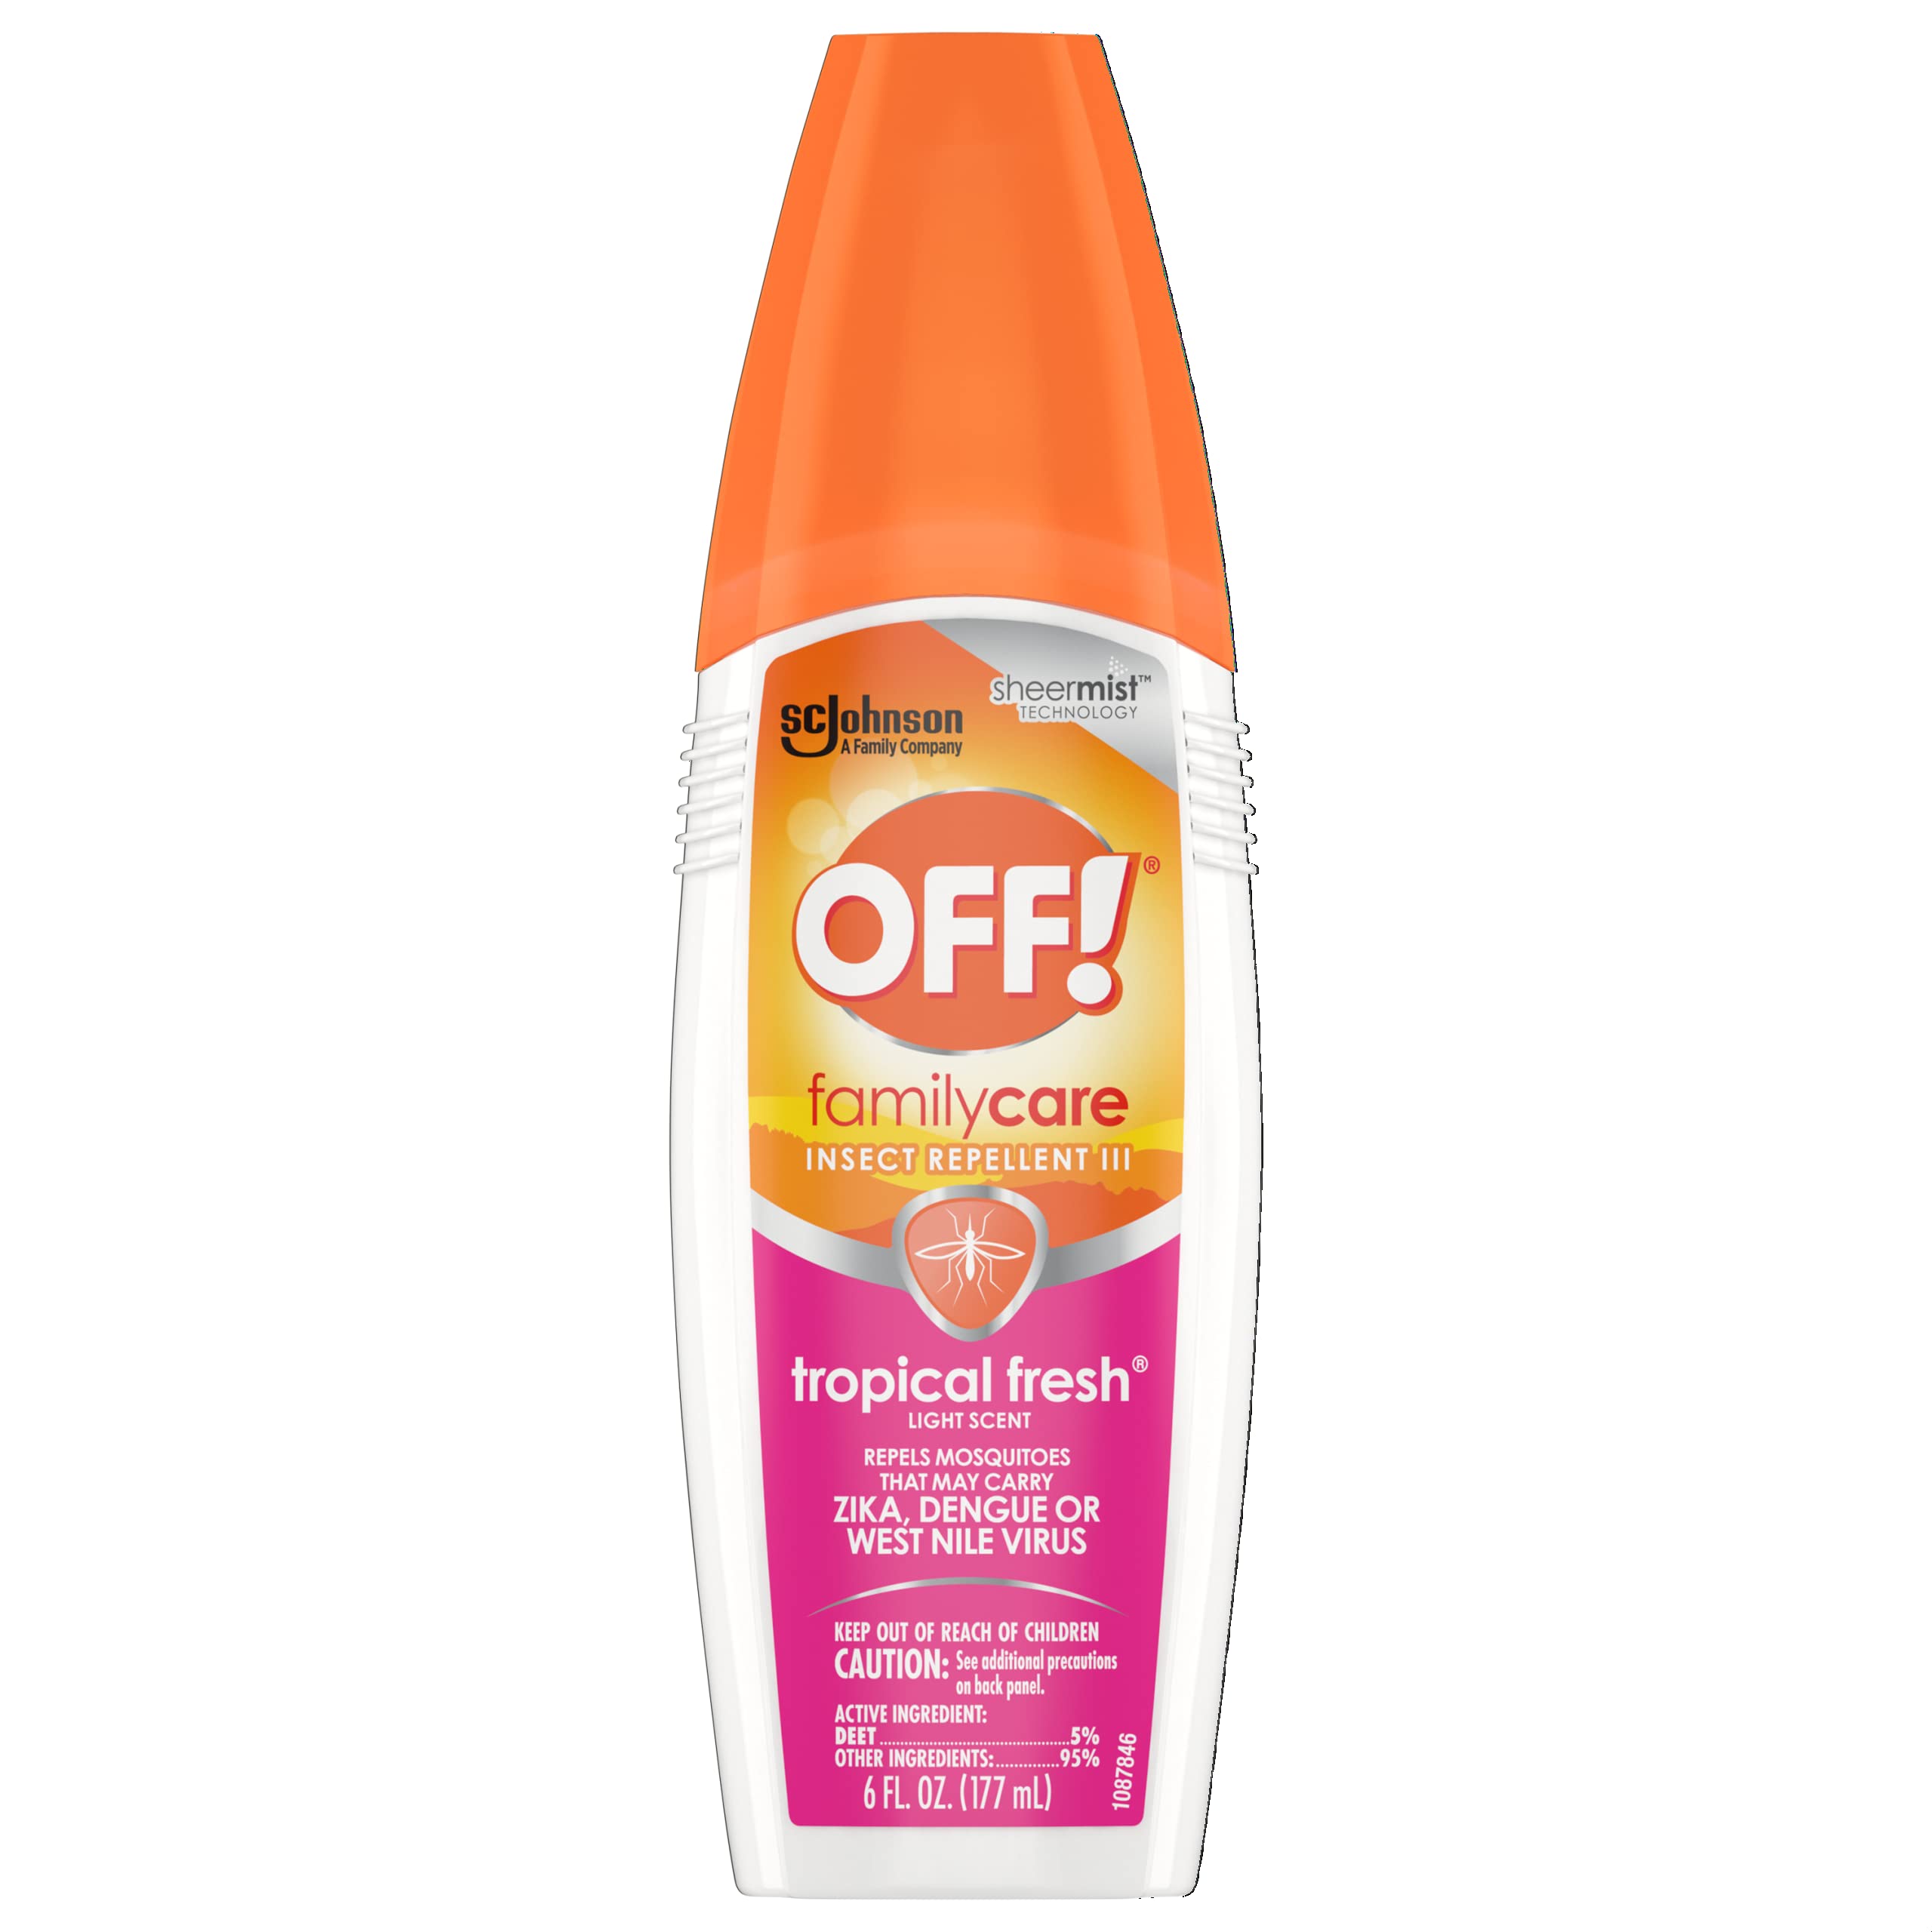 OFF!? FamilyCare Insect Repellent lll, Tropical Fresh, 6 fl oz